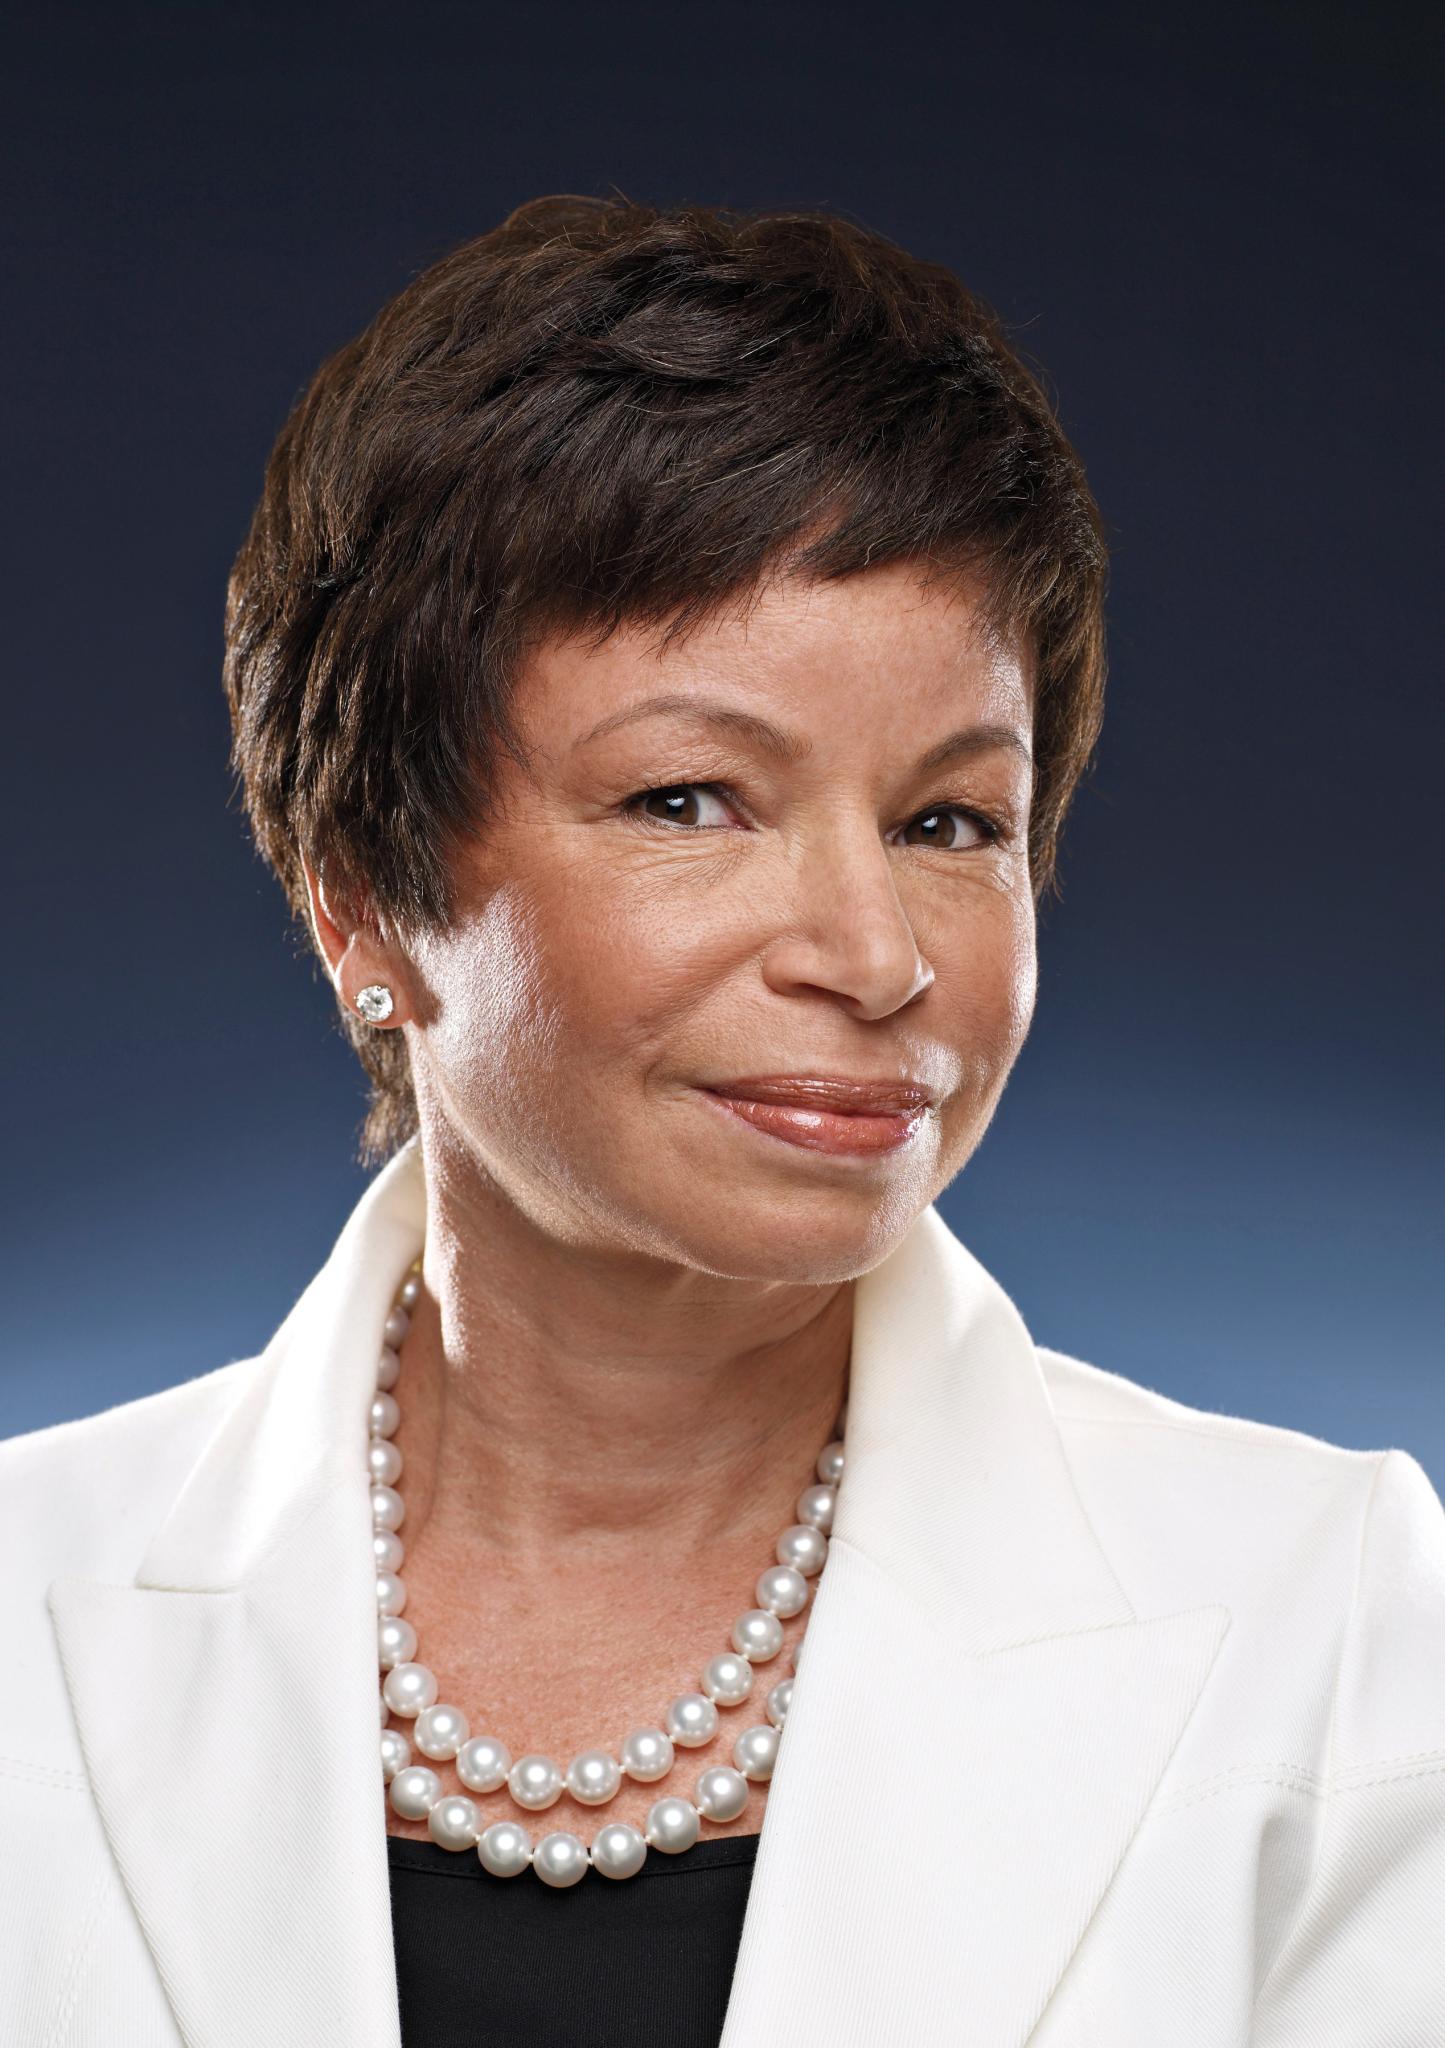 Valerie Jarrett: A Mother's Perspective On Our Brother's Future